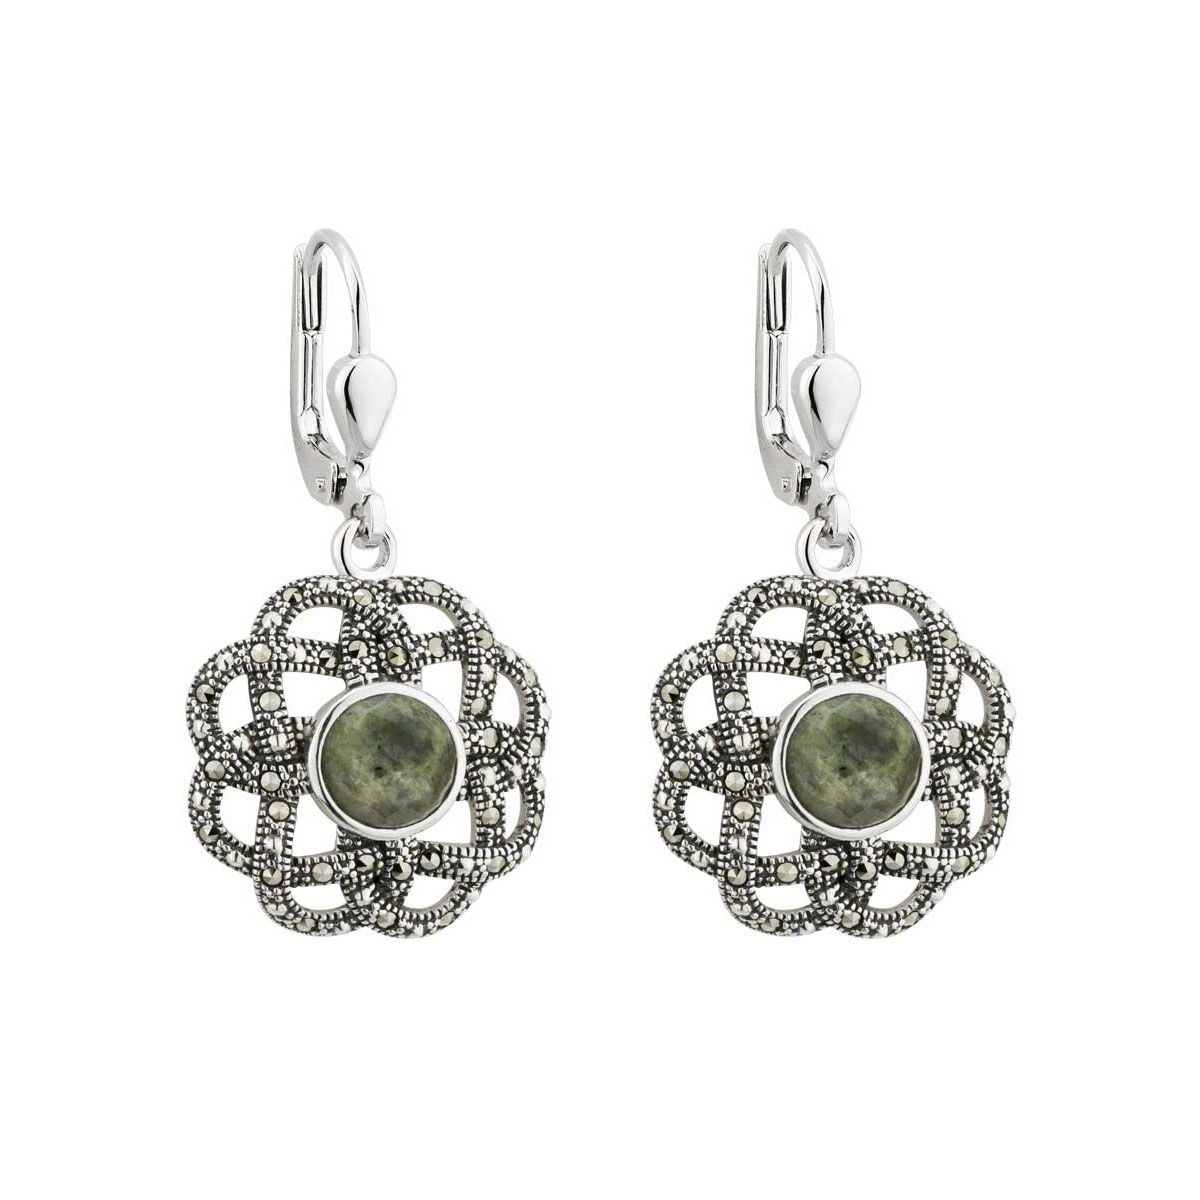 Cashs Ireland, Sterling Silver Marcasite and Marble Celtic Drop Pierced Earrings Pair